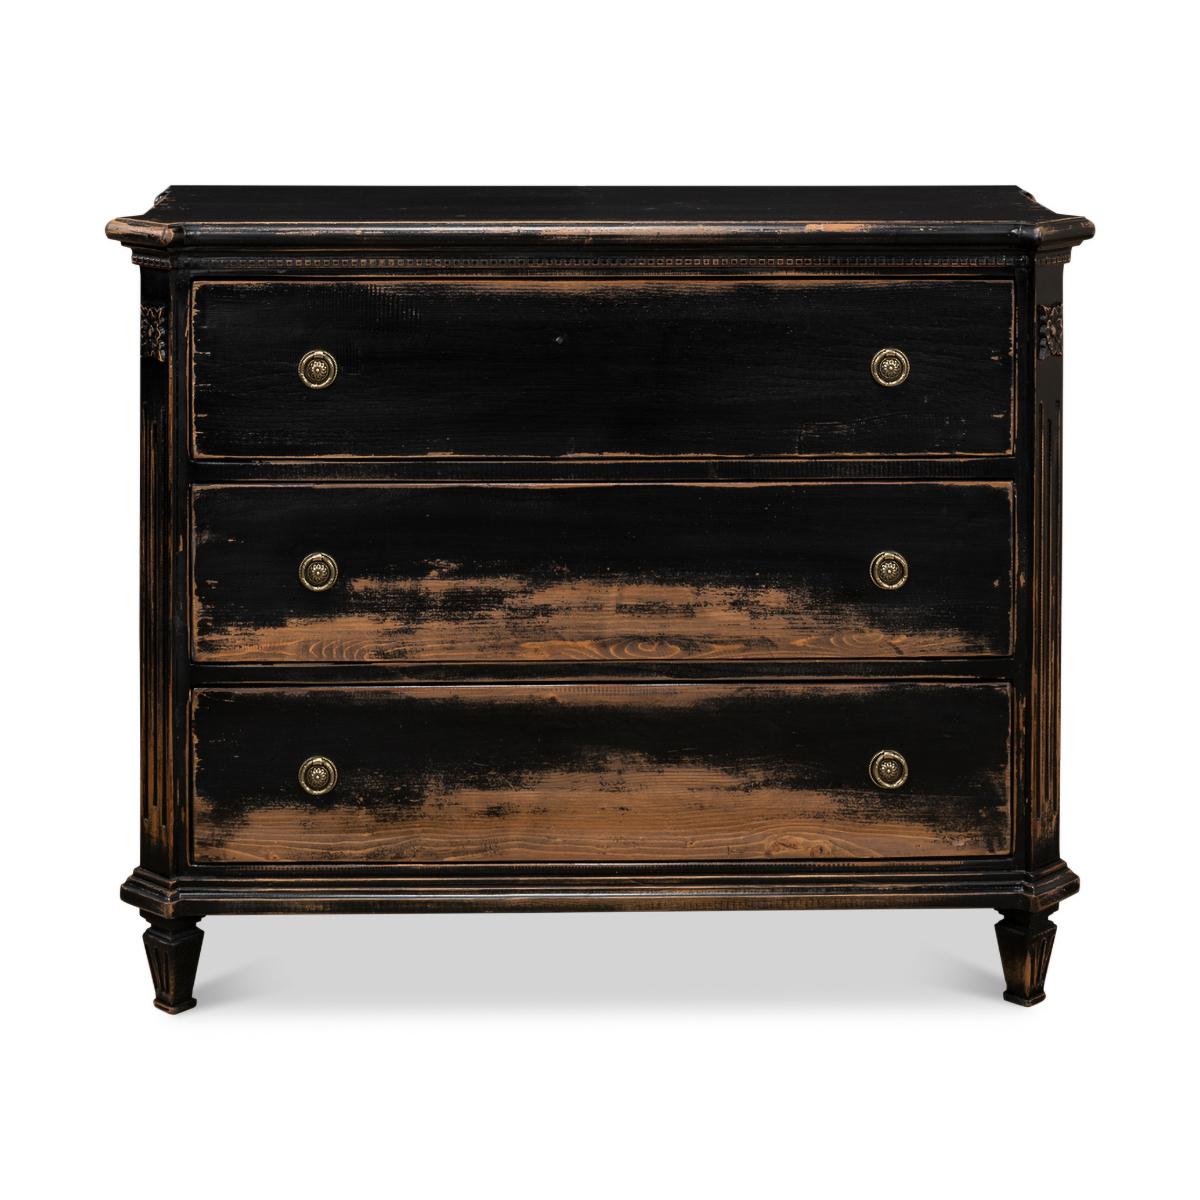 Louis XVI Style Antiqued Black Commodes with an antiqued and distressed rub through black painted finish. With canted corners, dental molding, and three long drawers each with ring handles, raised on square tapered legs.

Dimensions: 47